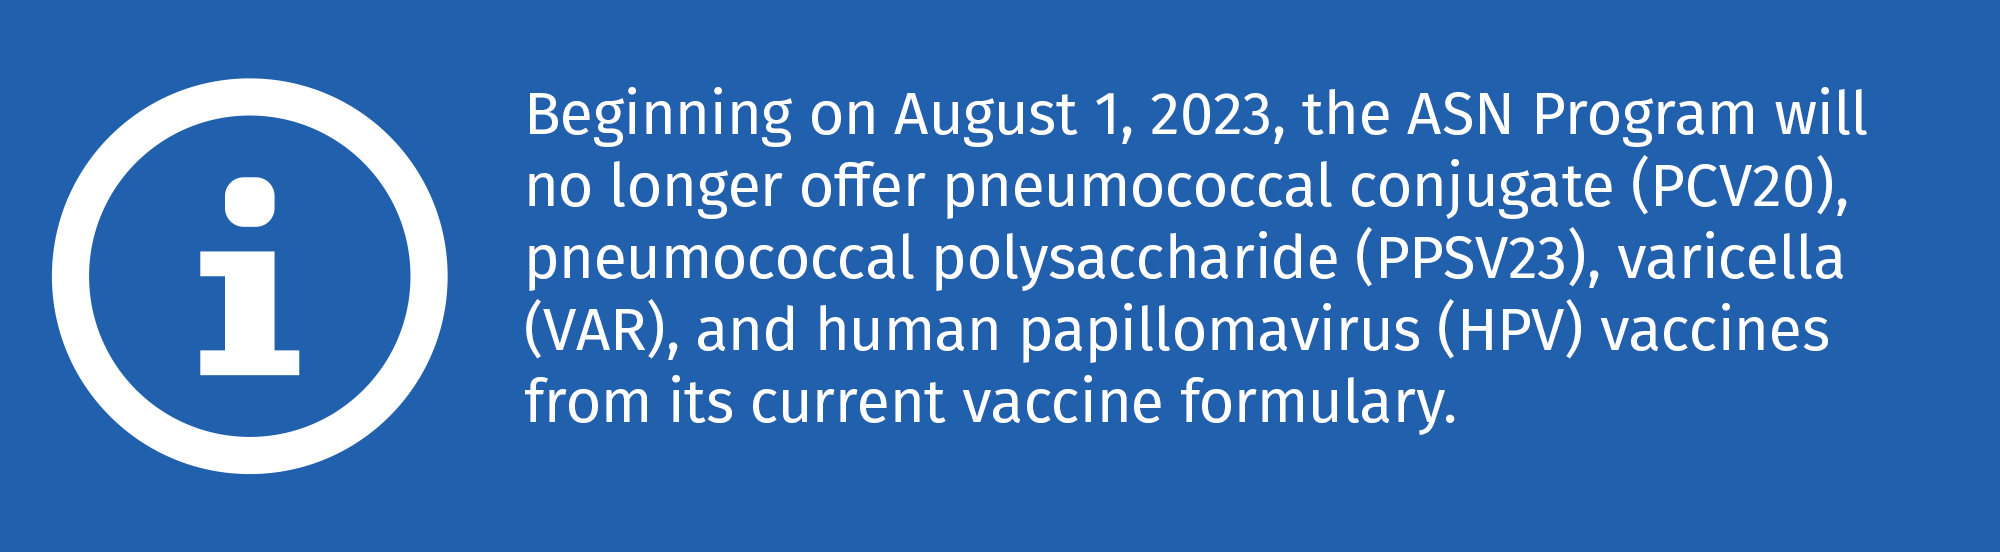 Beginning on August 1, 2023, the ASN Program will no longer offer pneumococcal conjugate (PCV20), pneumococcal polysaccharide (PPSV23), varicella (VAR), and human papillomavirus (HPV) vaccines from its current vaccine formulary.